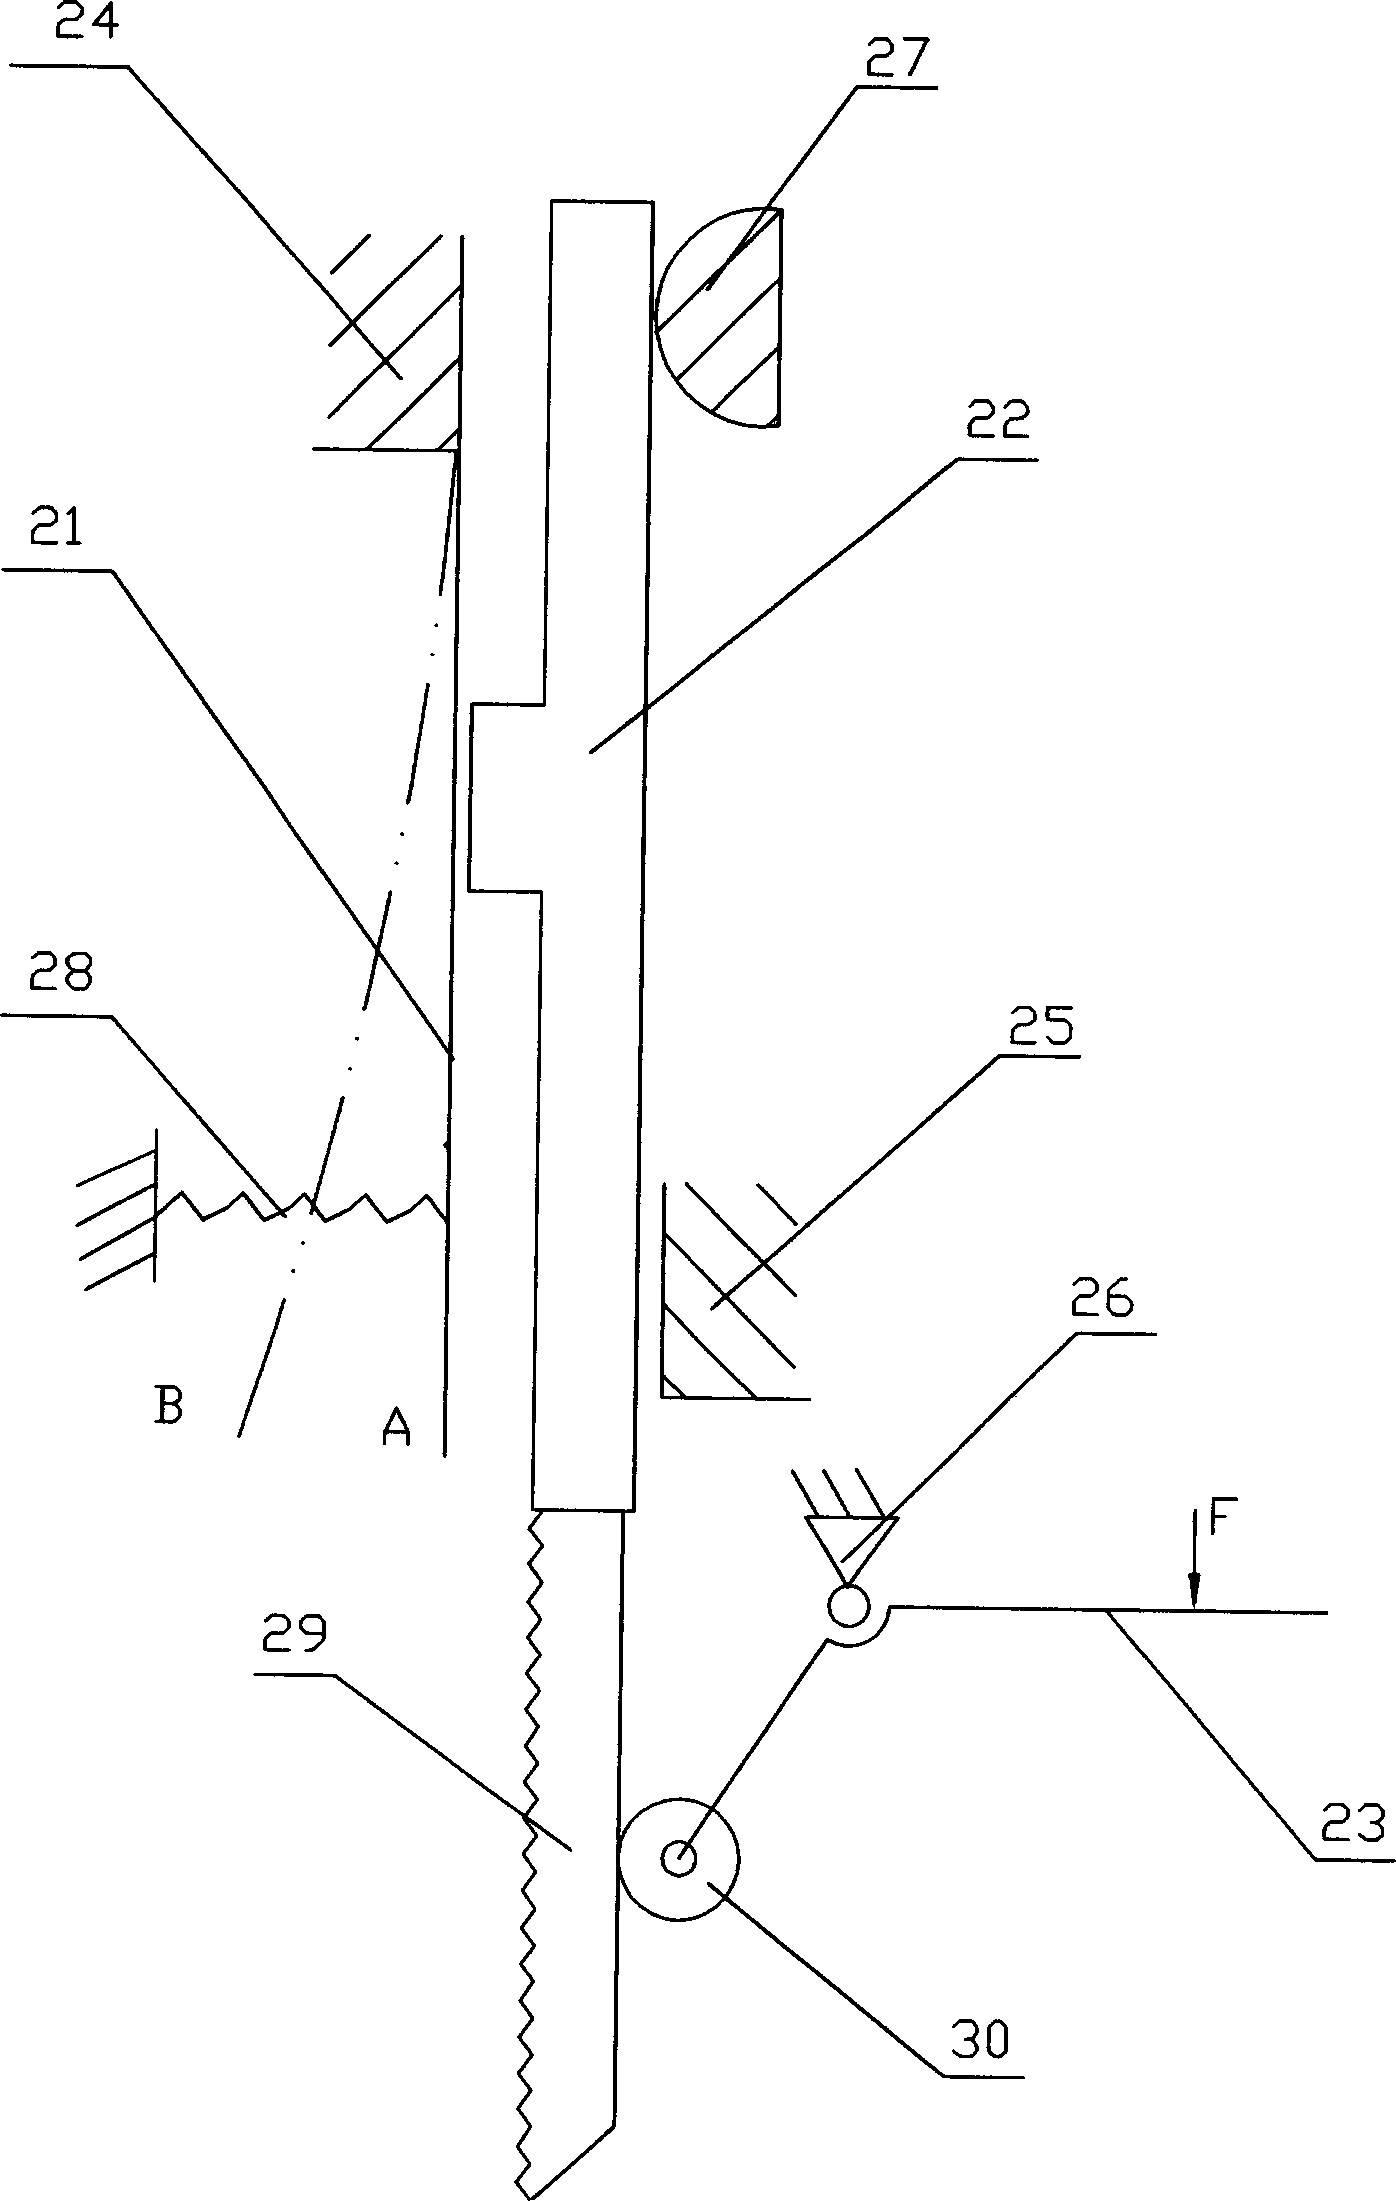 Transmission device capable of producing combined motion output